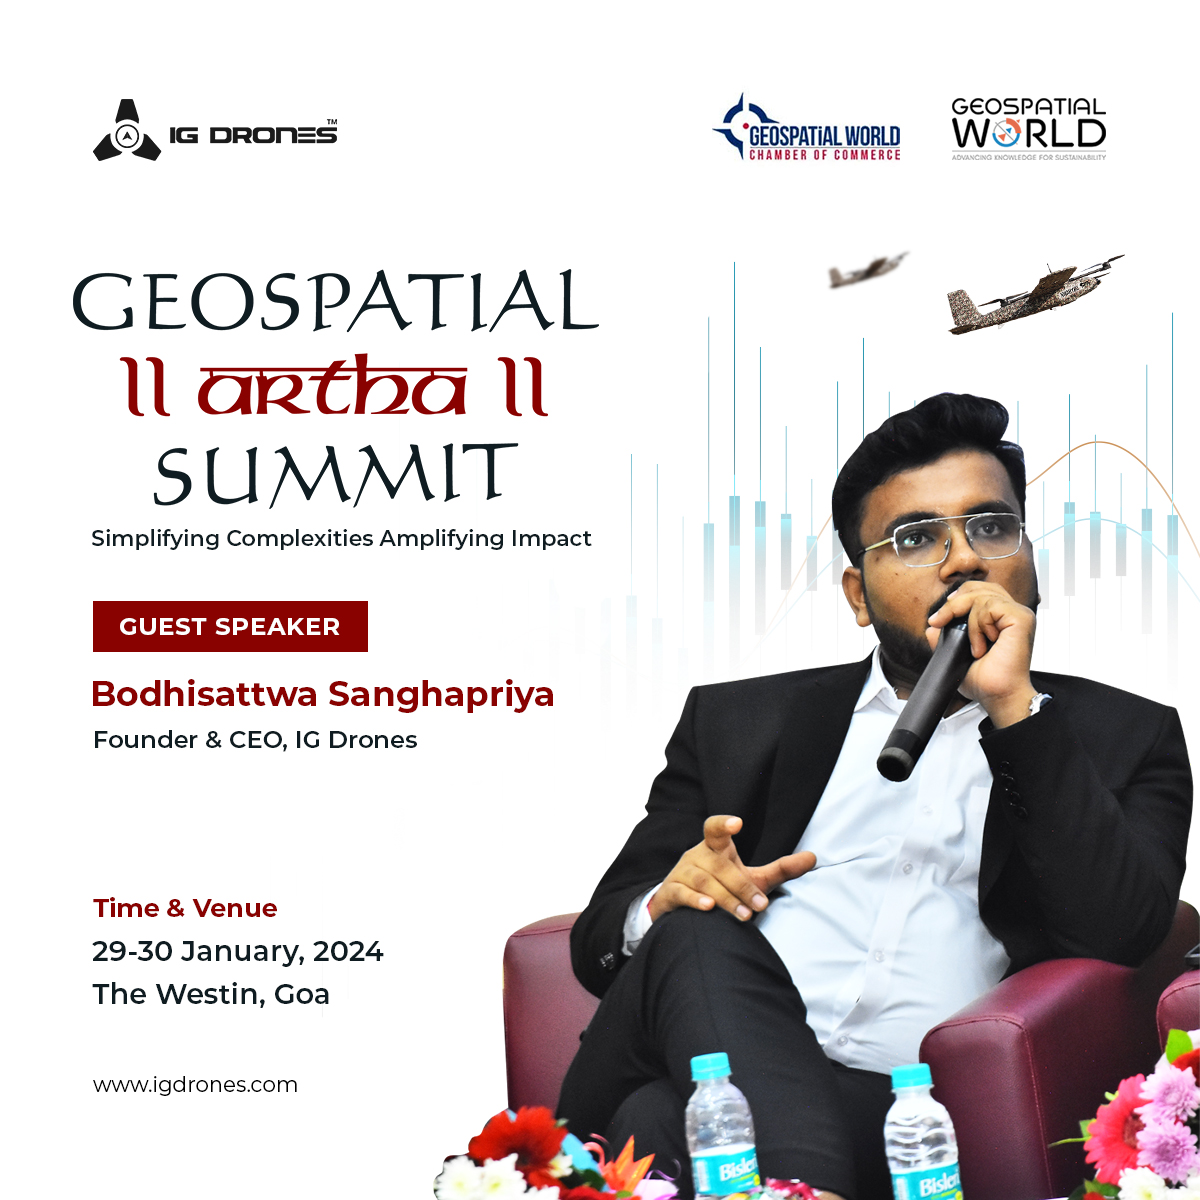 Witness our Founder and CEO Bodhisattwa Sanghapriya as the chief speaker at the Geospatial Artha Summit 2024, marking a momentous achievement!

#GeospatialArthaSummit2024 #IGDronesInnovation
#DronesTechnology #MappingTheFuture #dronesforgood #drones #droneecosystem